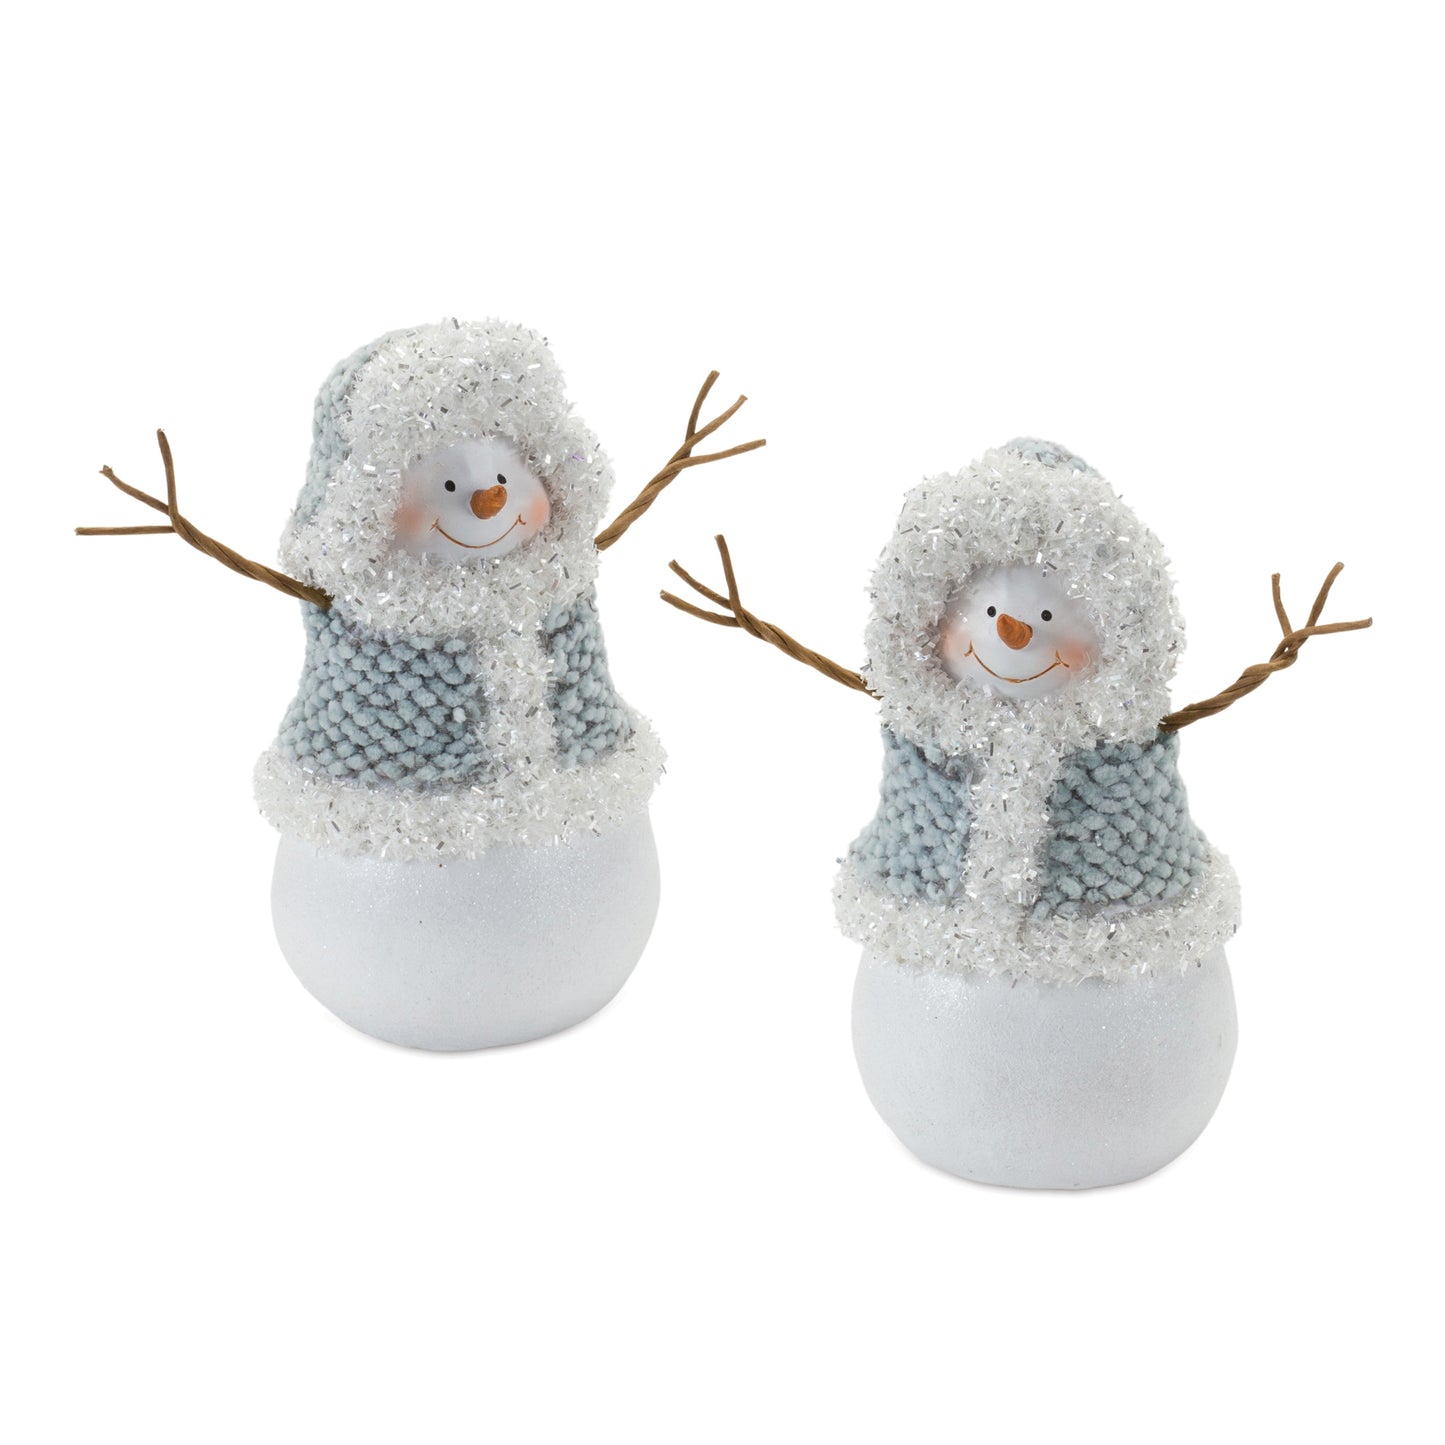 Snowman with Sweater Figurine (Set of 2)